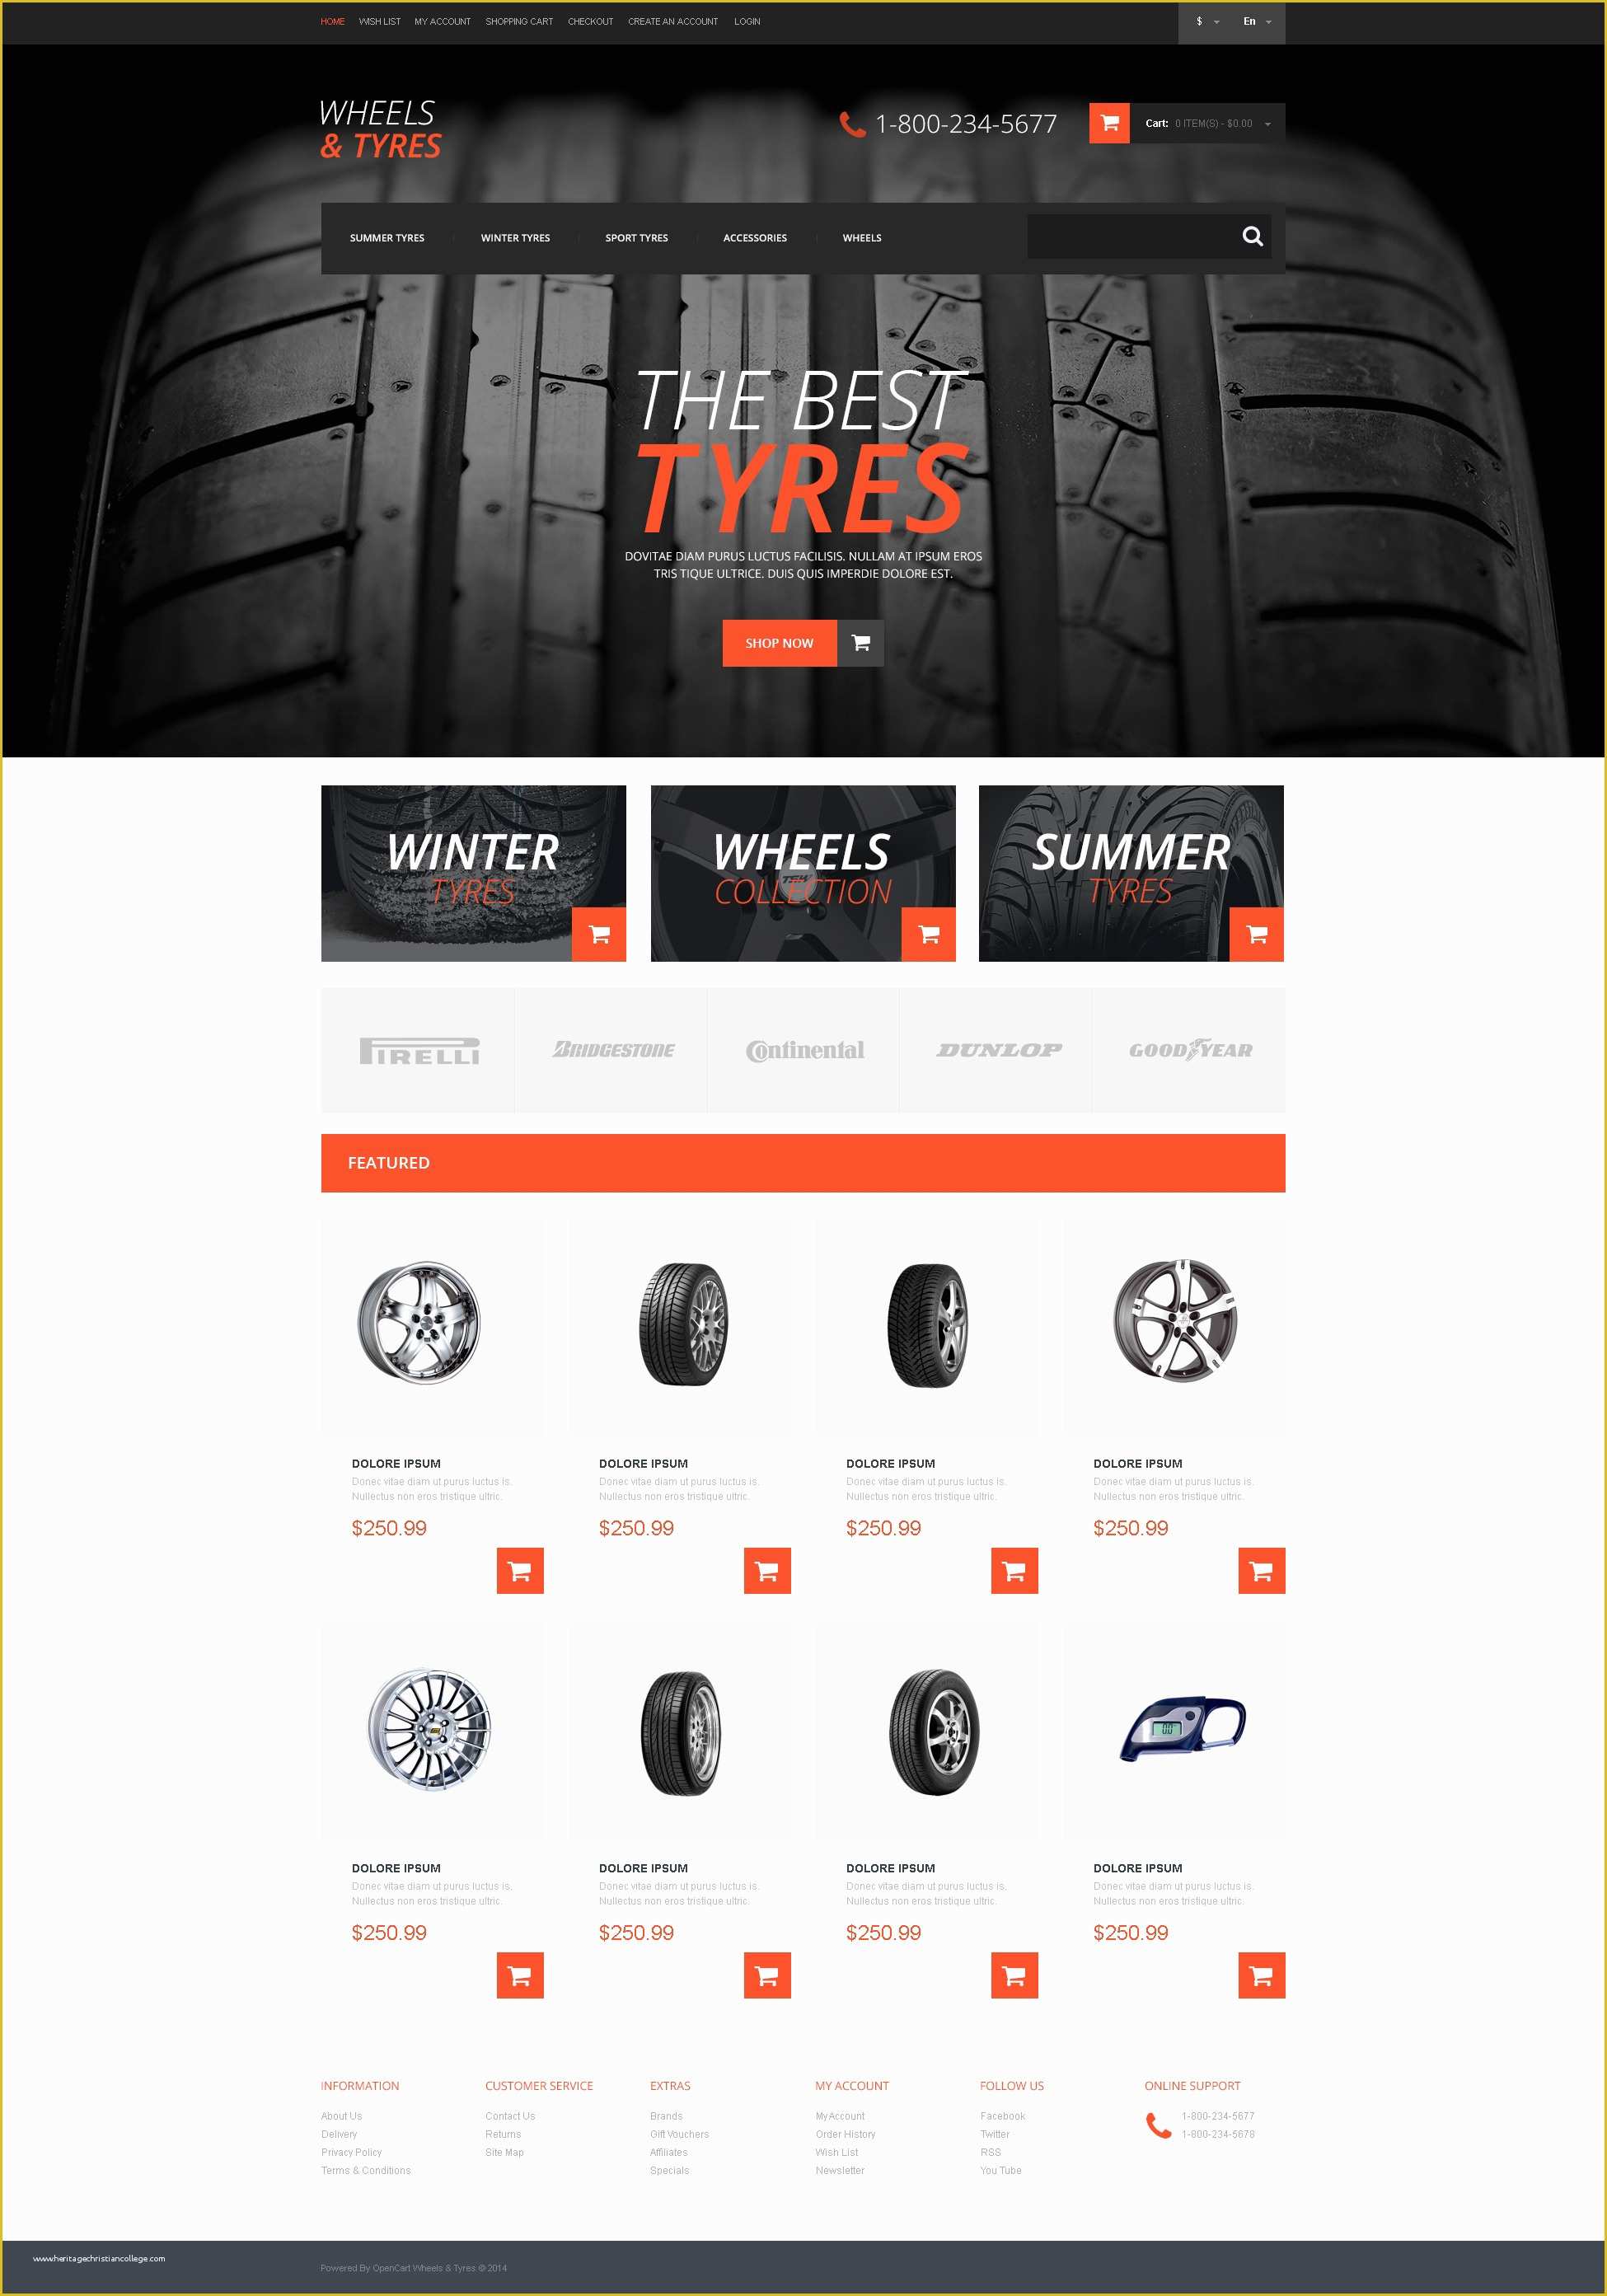 Free Tire Shop Website Template Of Wheels & Tires Responsive Opencart Template